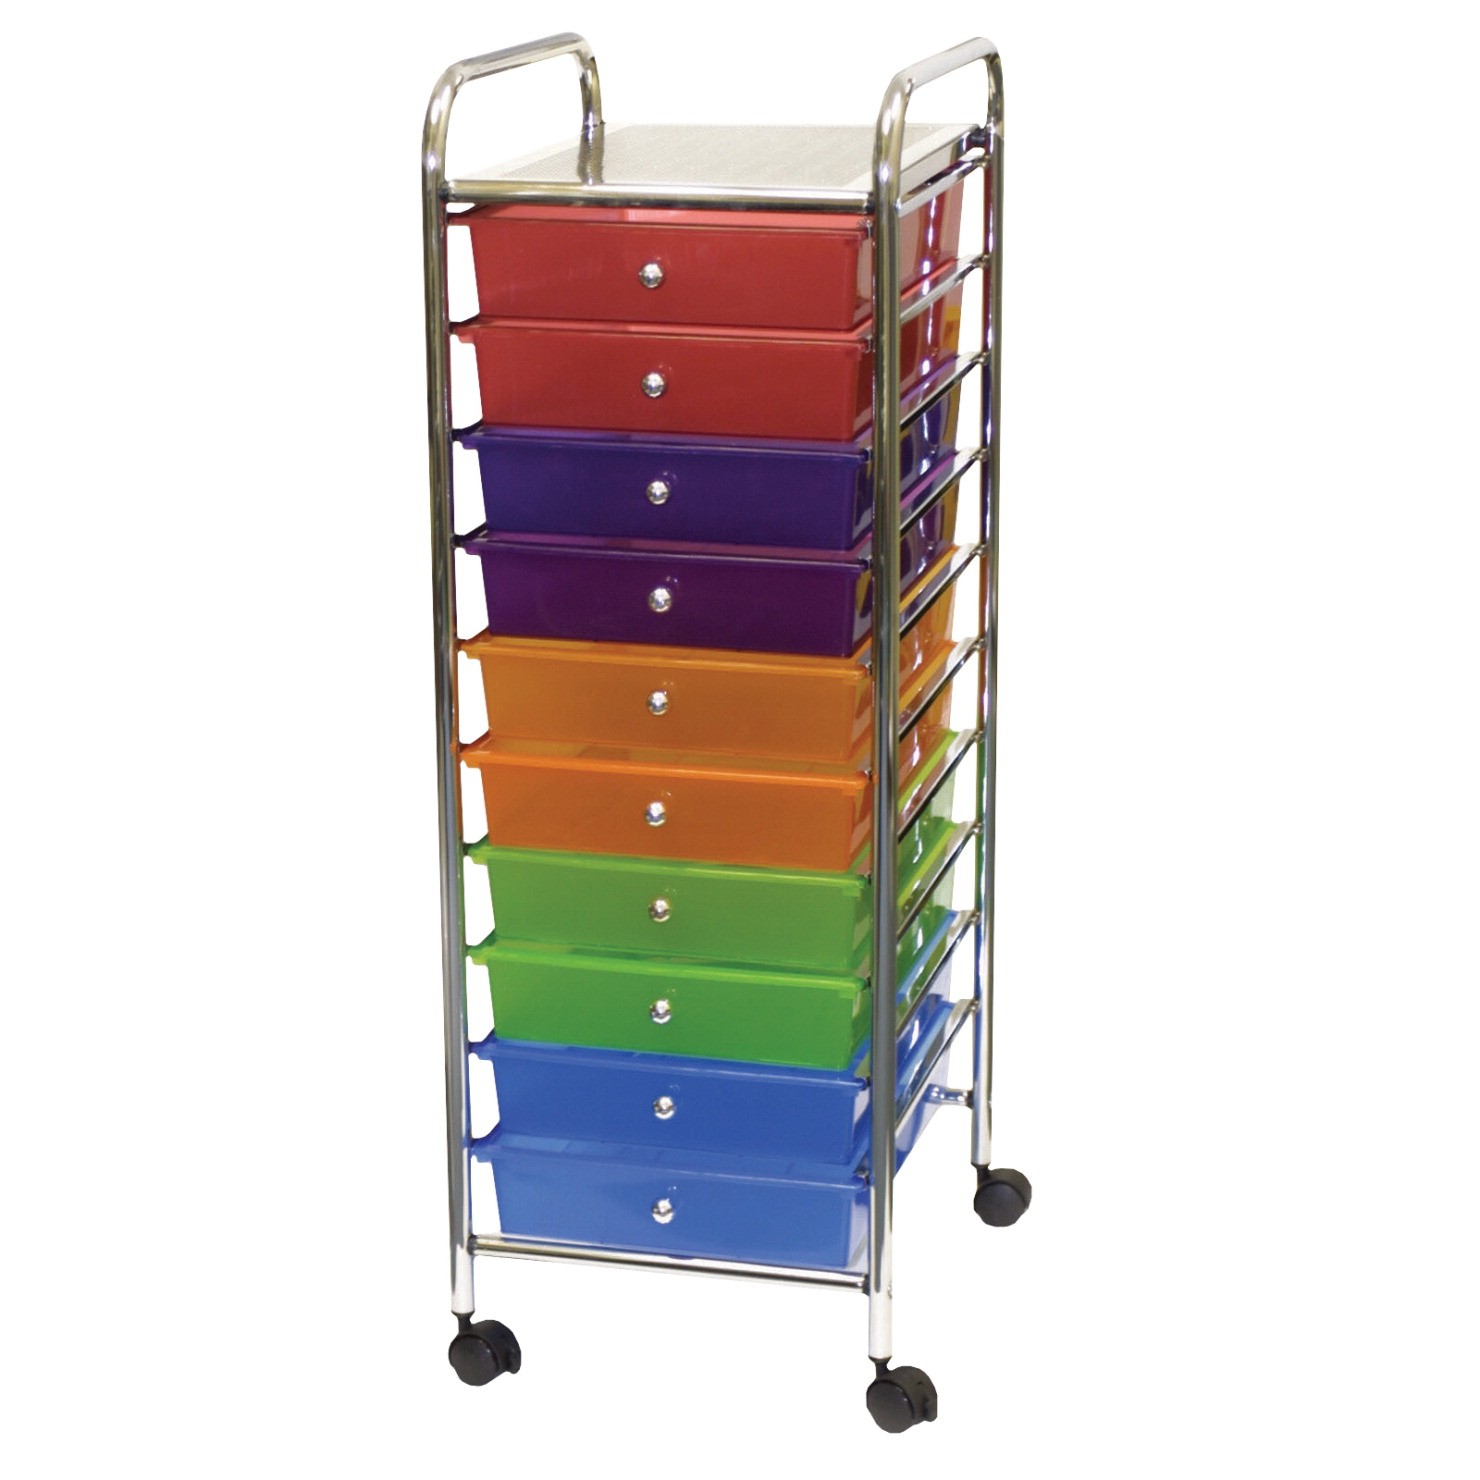 Rolling Cart with 10 Drawers, 13 X 15-1/4 X 37-1/2 In., Chrome Frame with Multicolored Polycarbonate Drawers and 2 Locking Casters